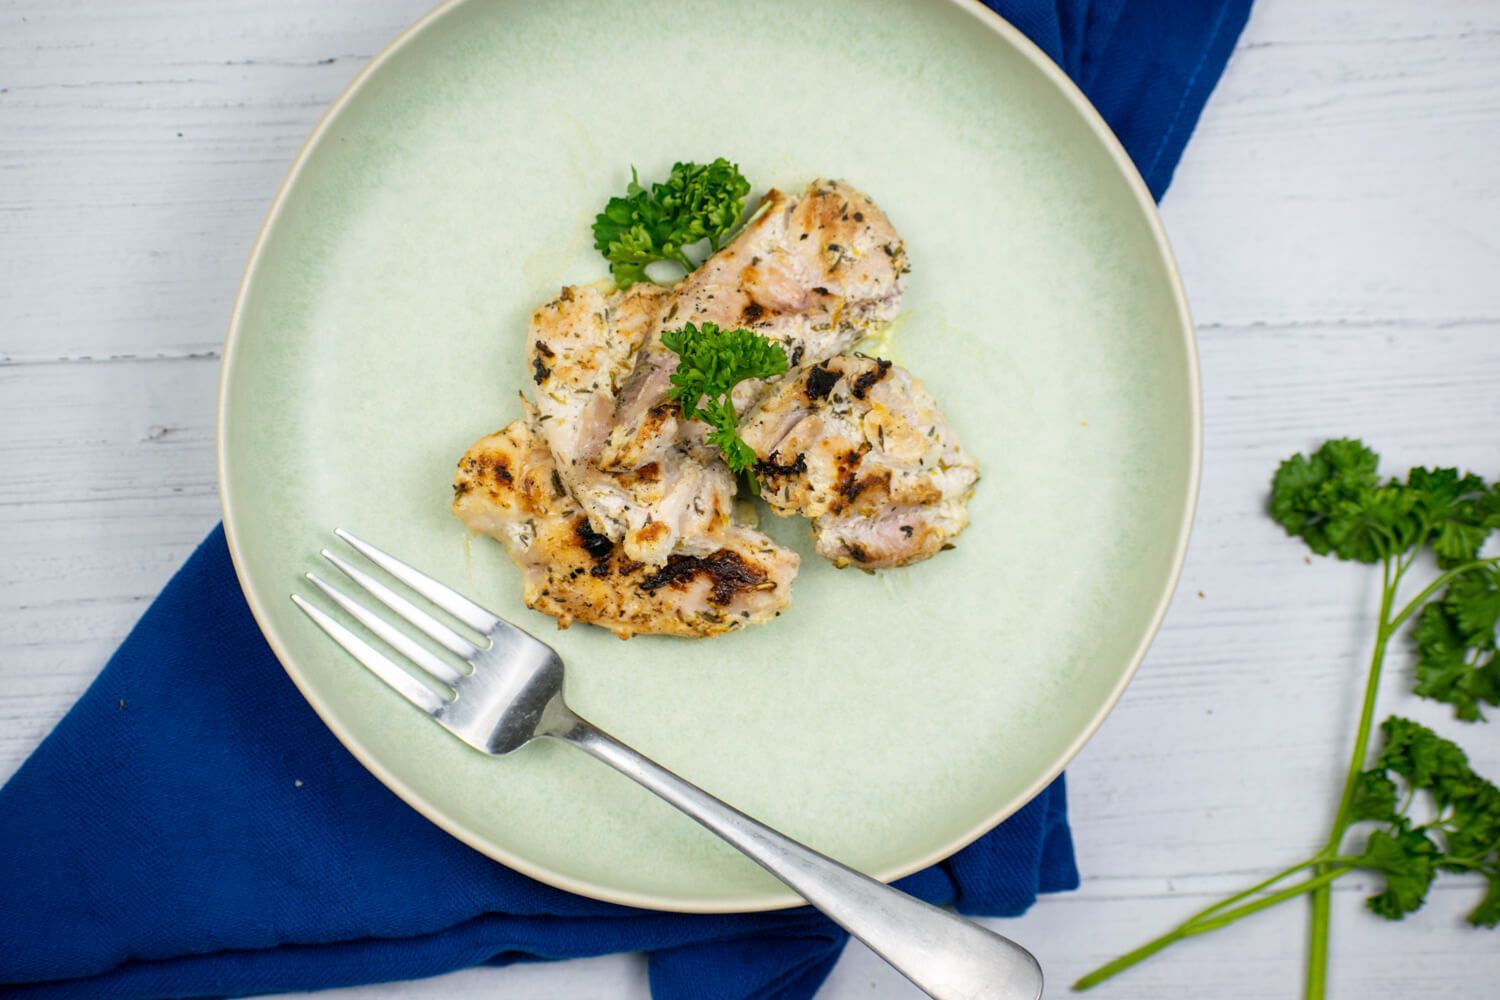 Greek chicken thighs with fresh parsley on a plate with a blue napkin.